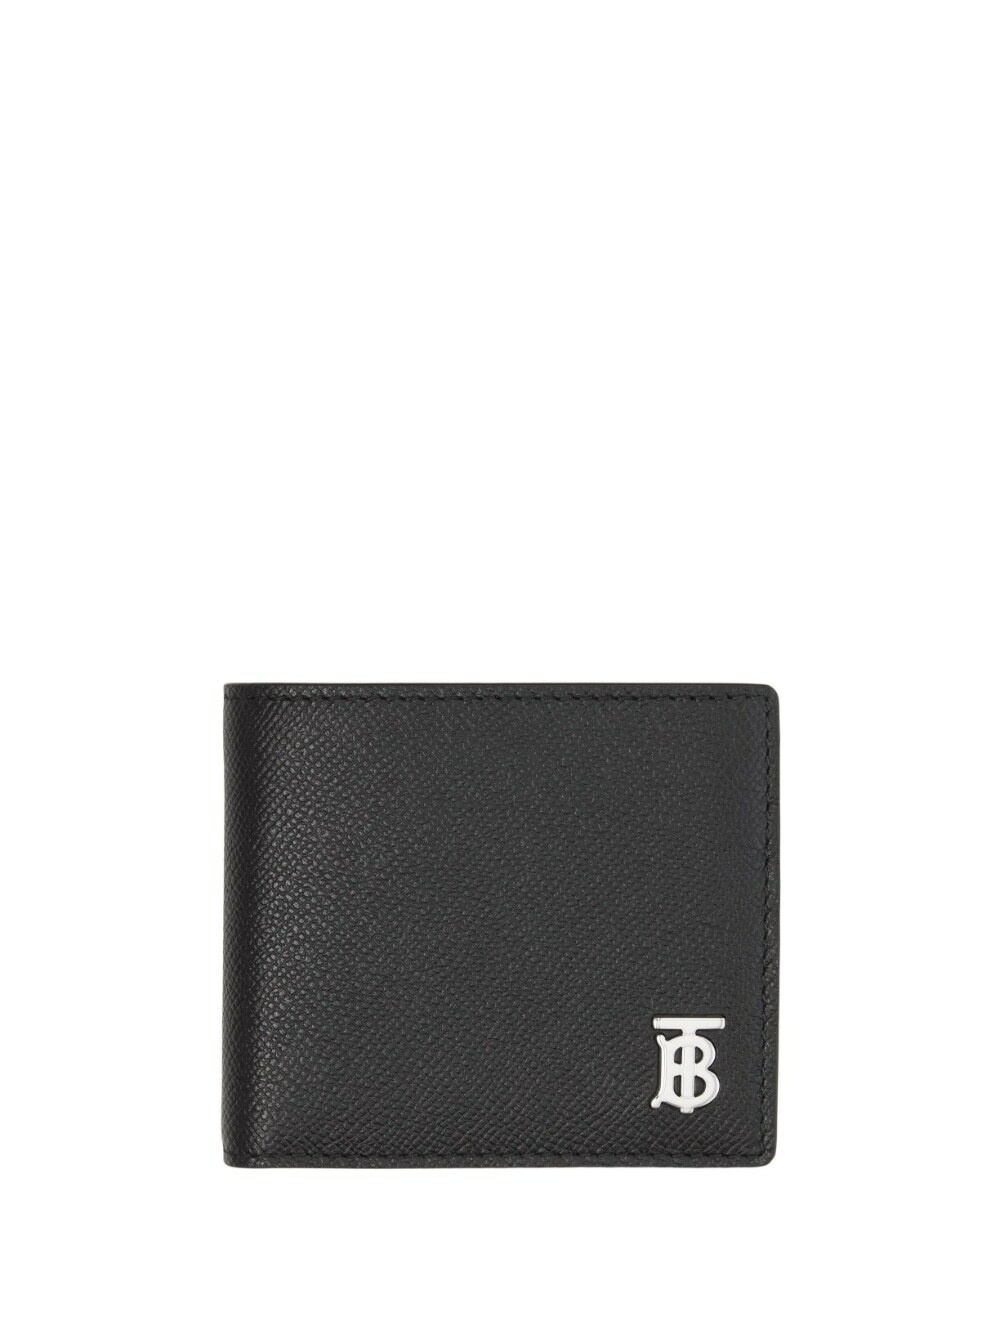 BURBERRY - Leather Wallet Burberry